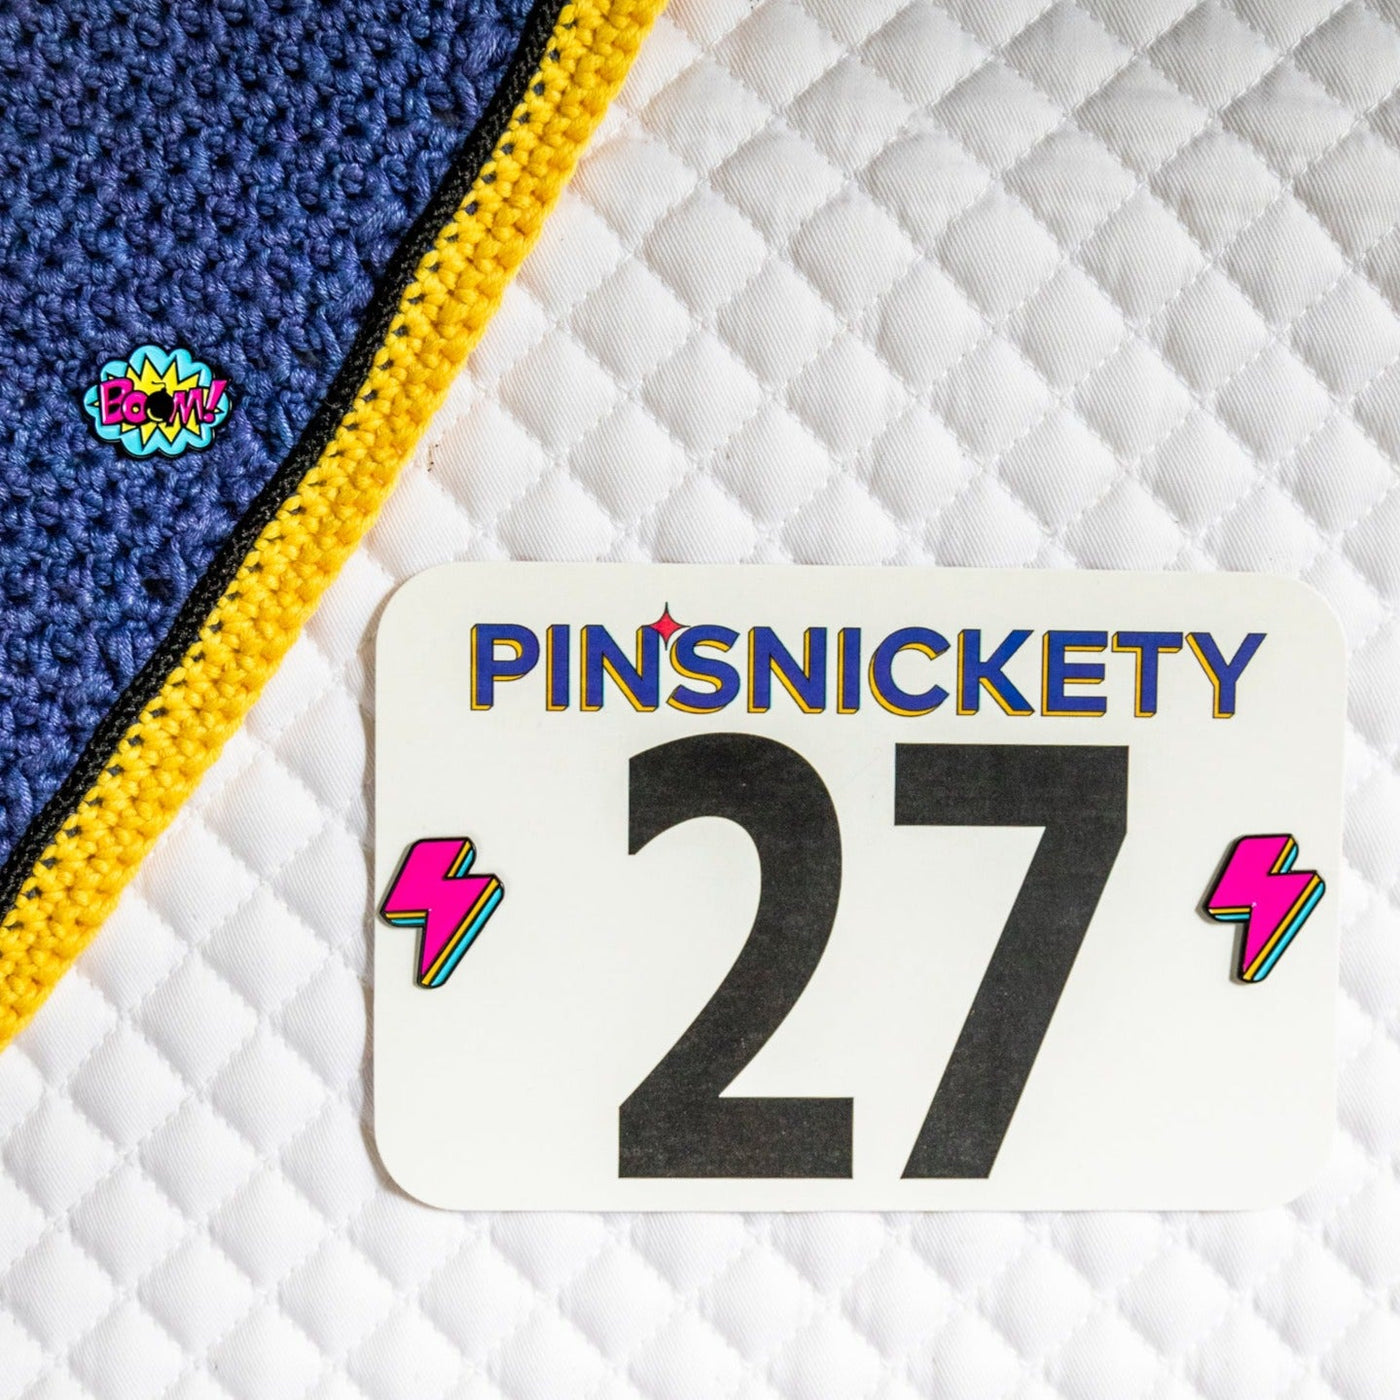 BOOM! Pins by Pinsnickety